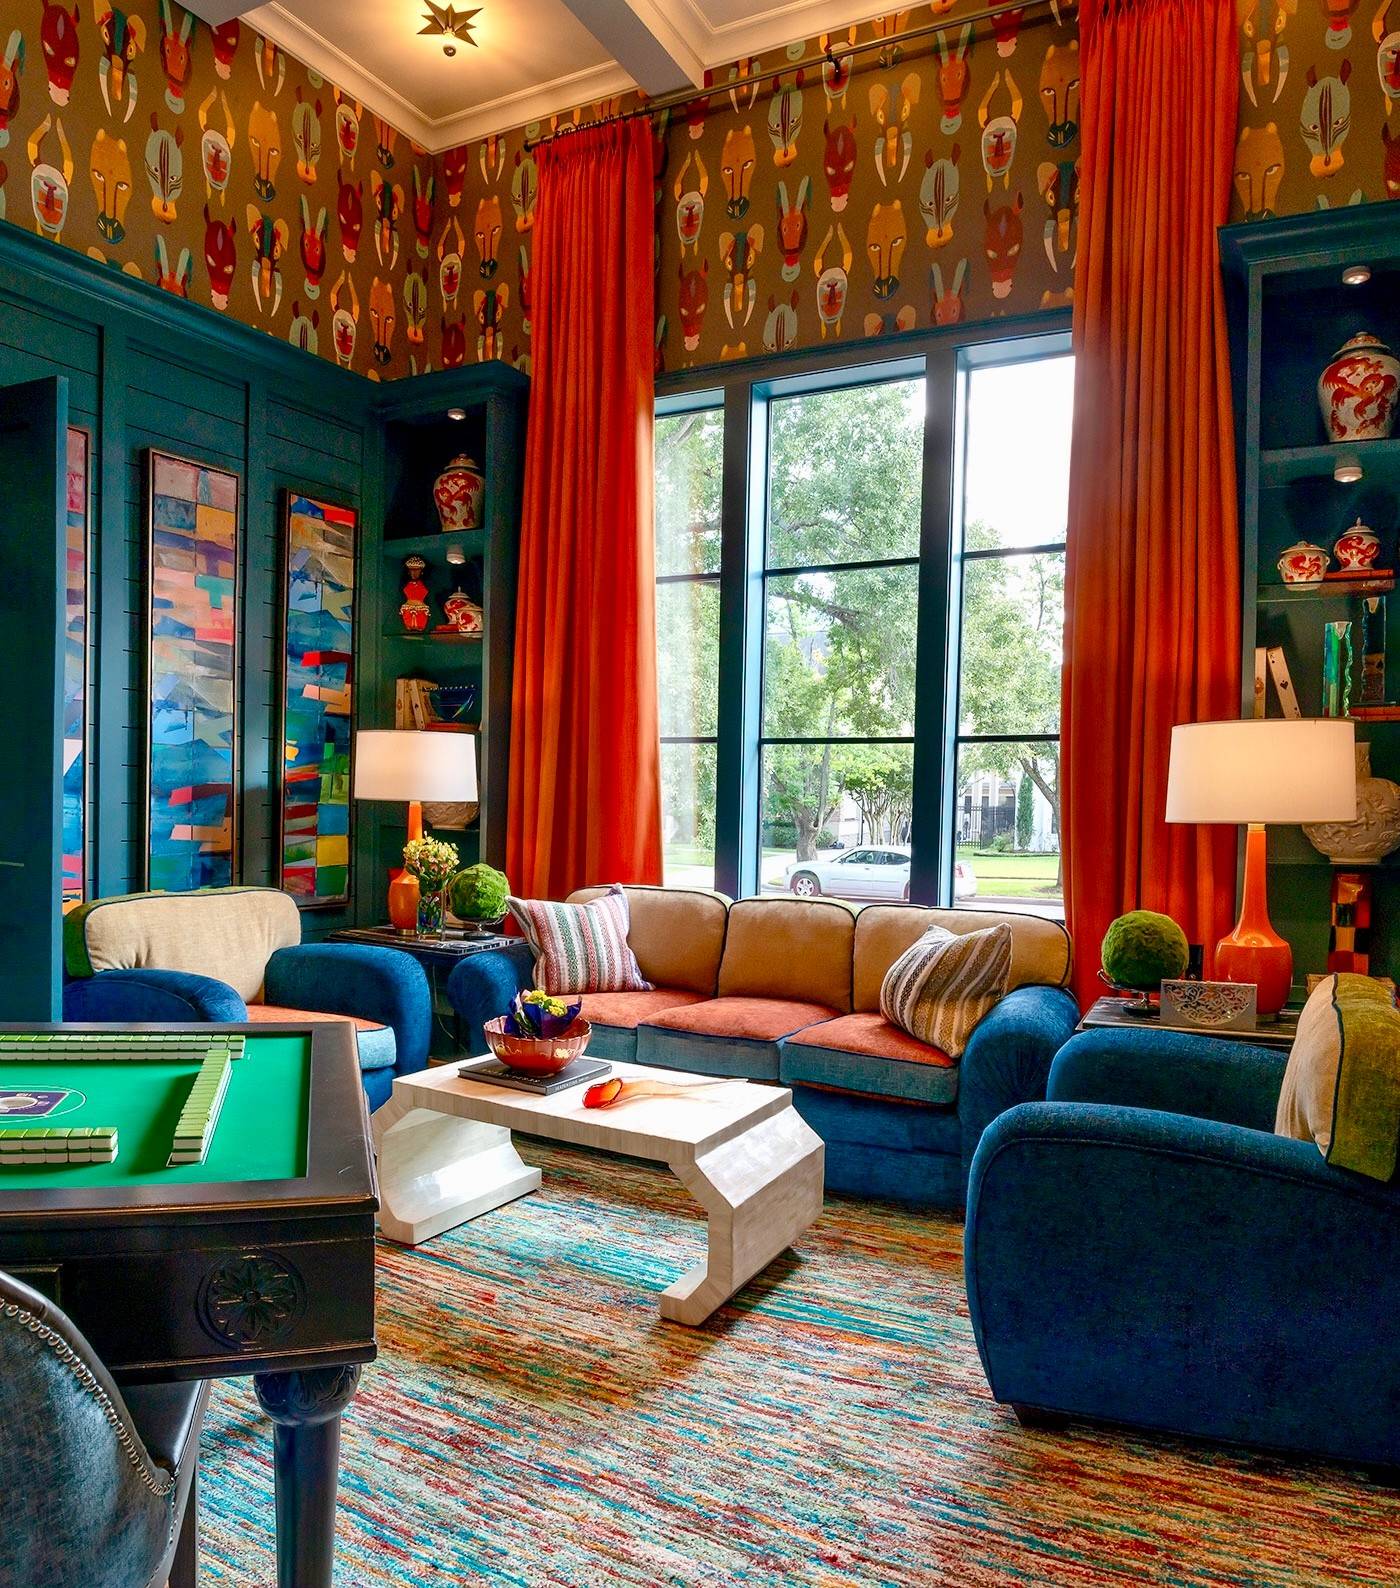 Teal And Red Photos Ideas Houzz